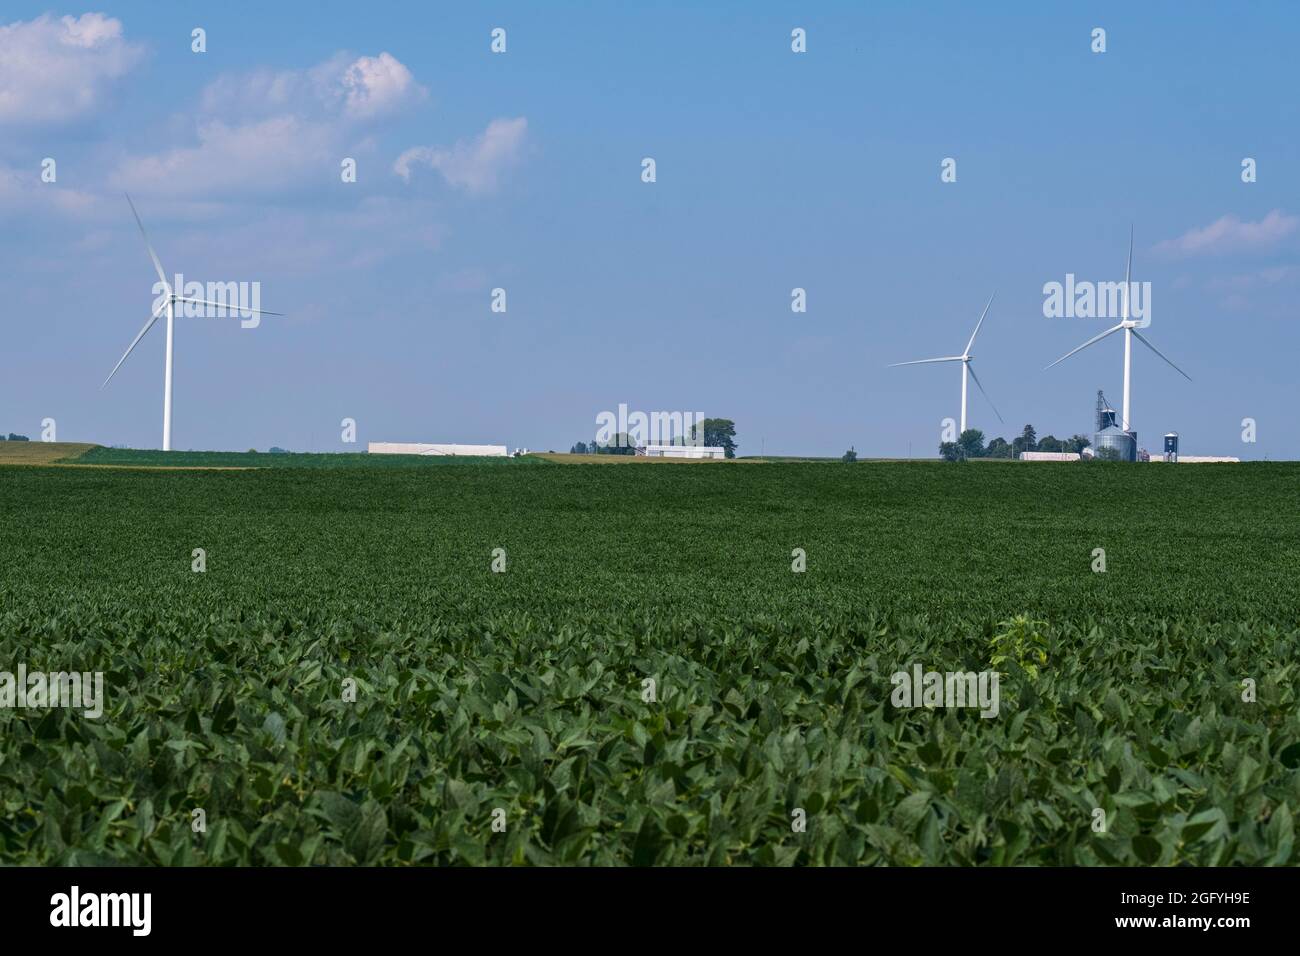 Near Earlville, Iowa.  Windmills and Grain Storage Bins. Soy Beans in foreground. Stock Photo